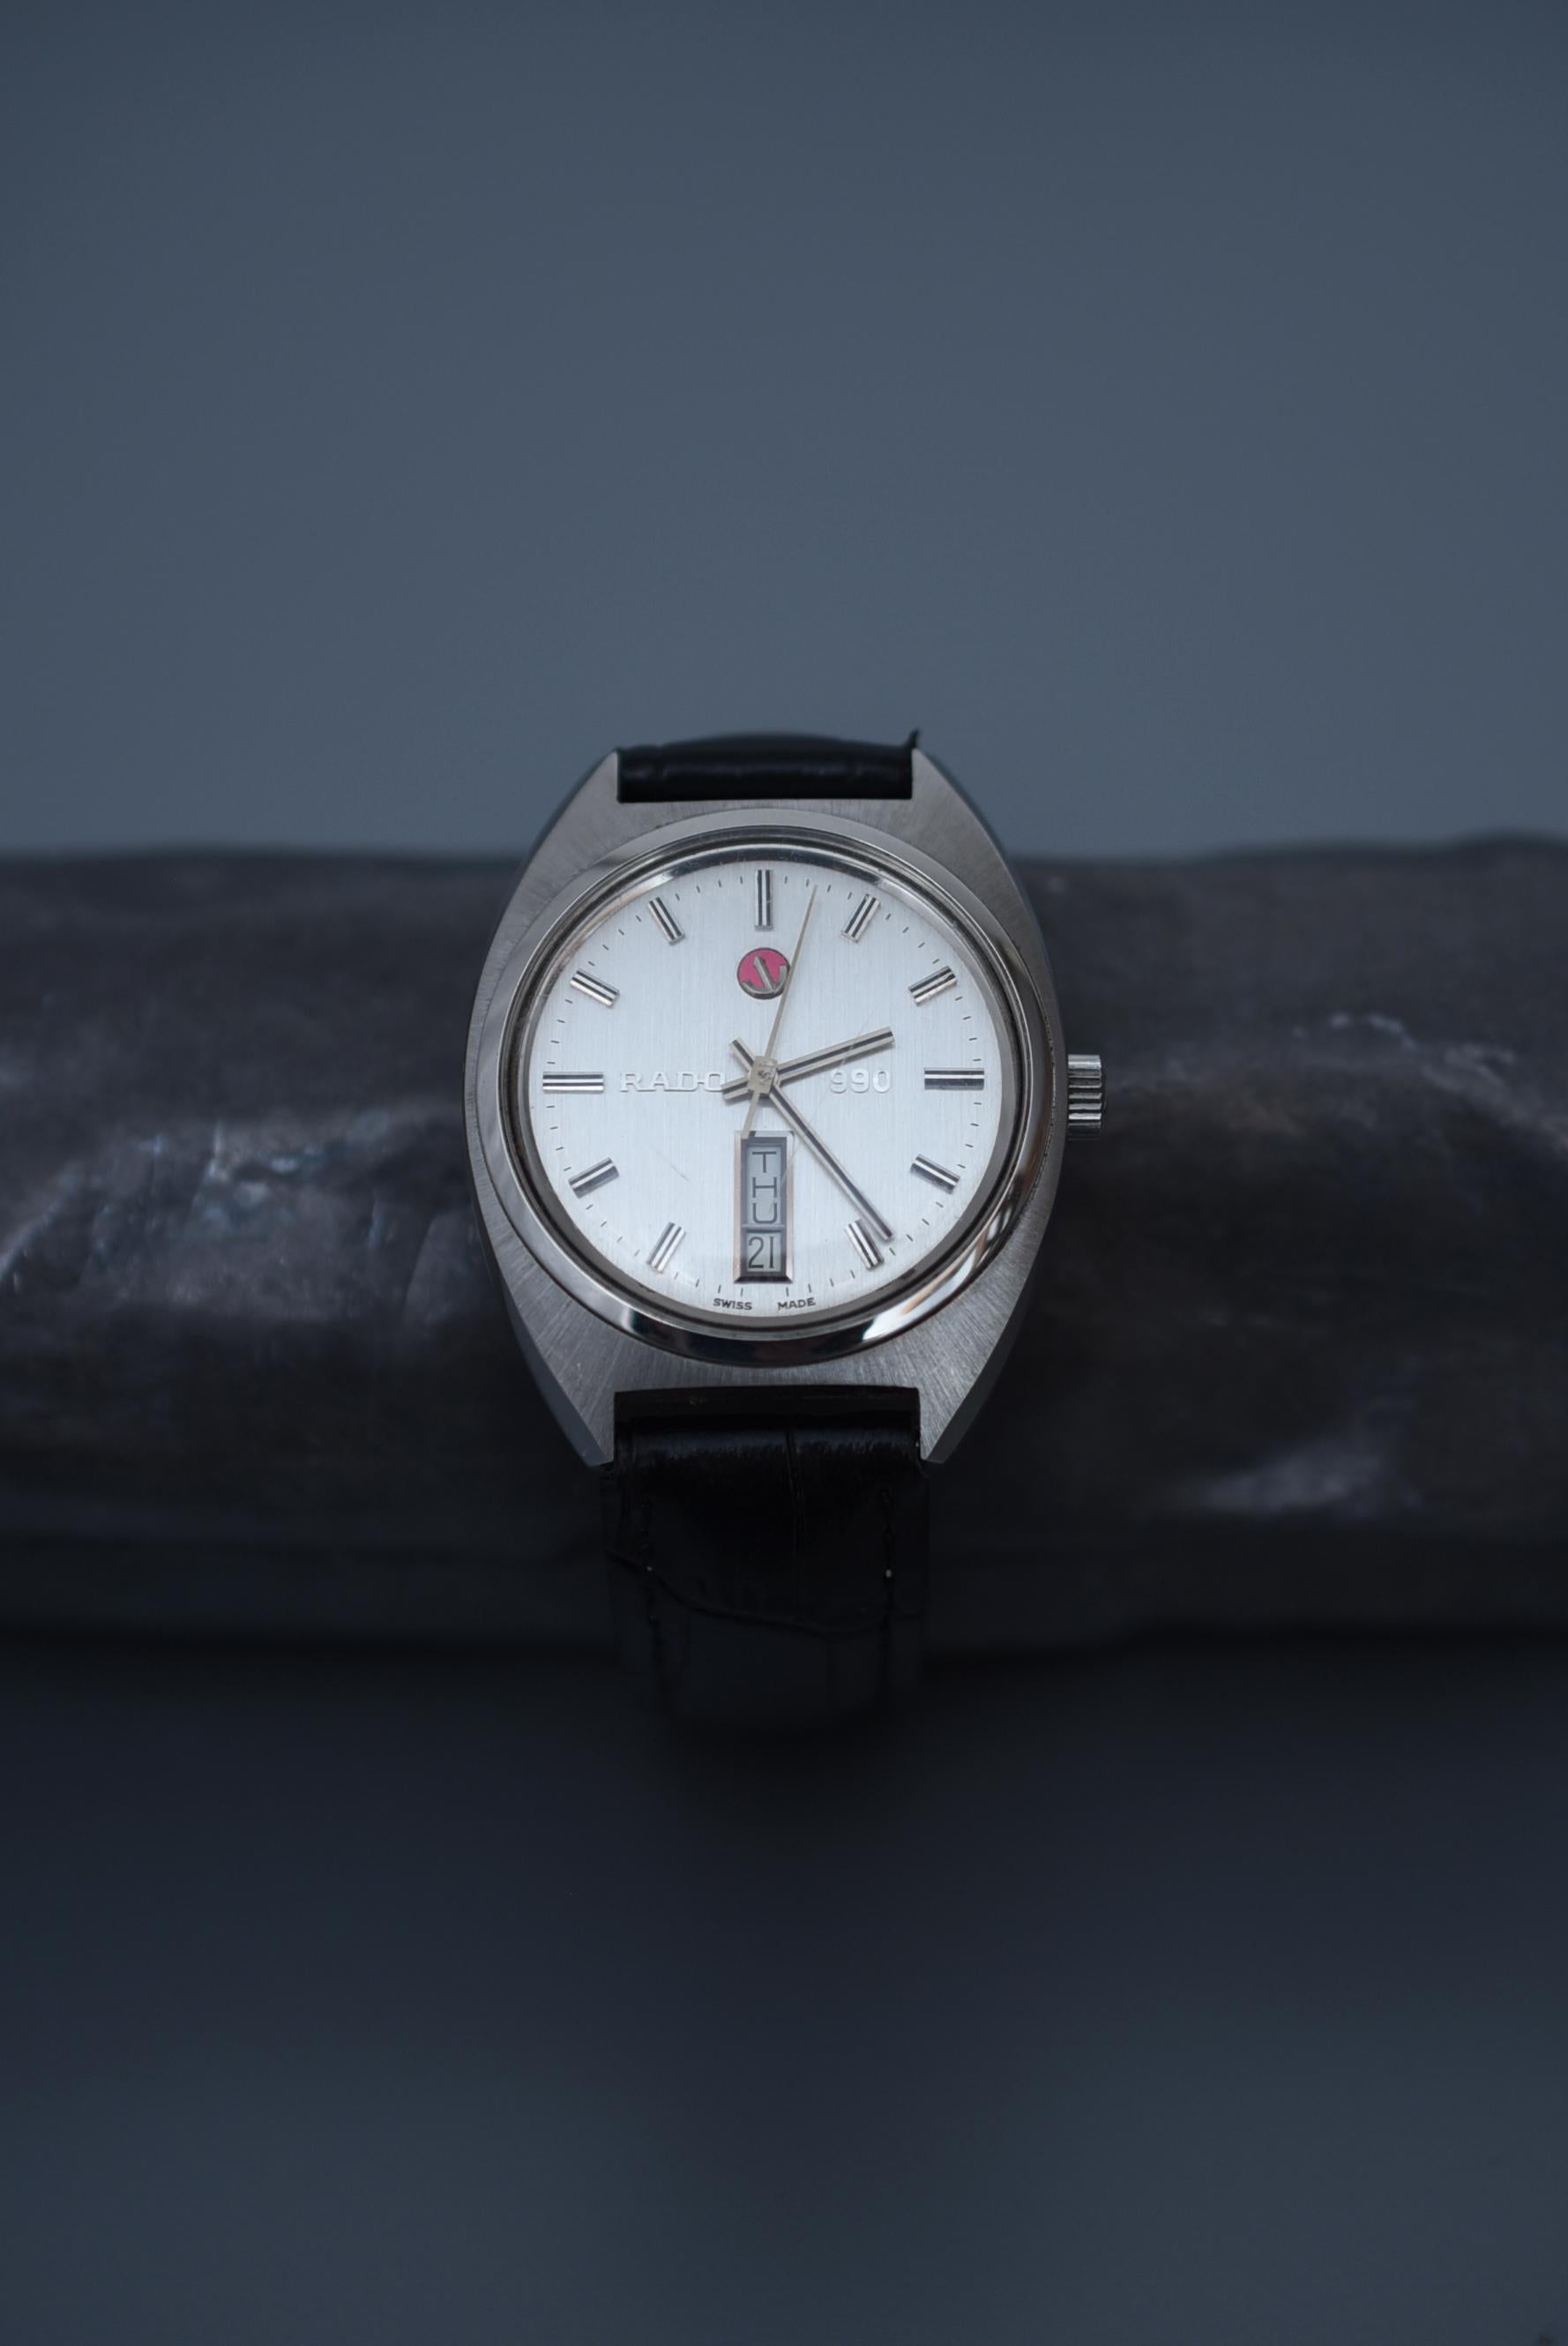 RADO  990  / 1960-1970s Vintage watch 

size : case 3.5cm
arm circumference : 17cm between 21cm
No.8180663

movement : Hand-wound / Automatic

This is RADO's 990. The antique silver dial features a rotating 